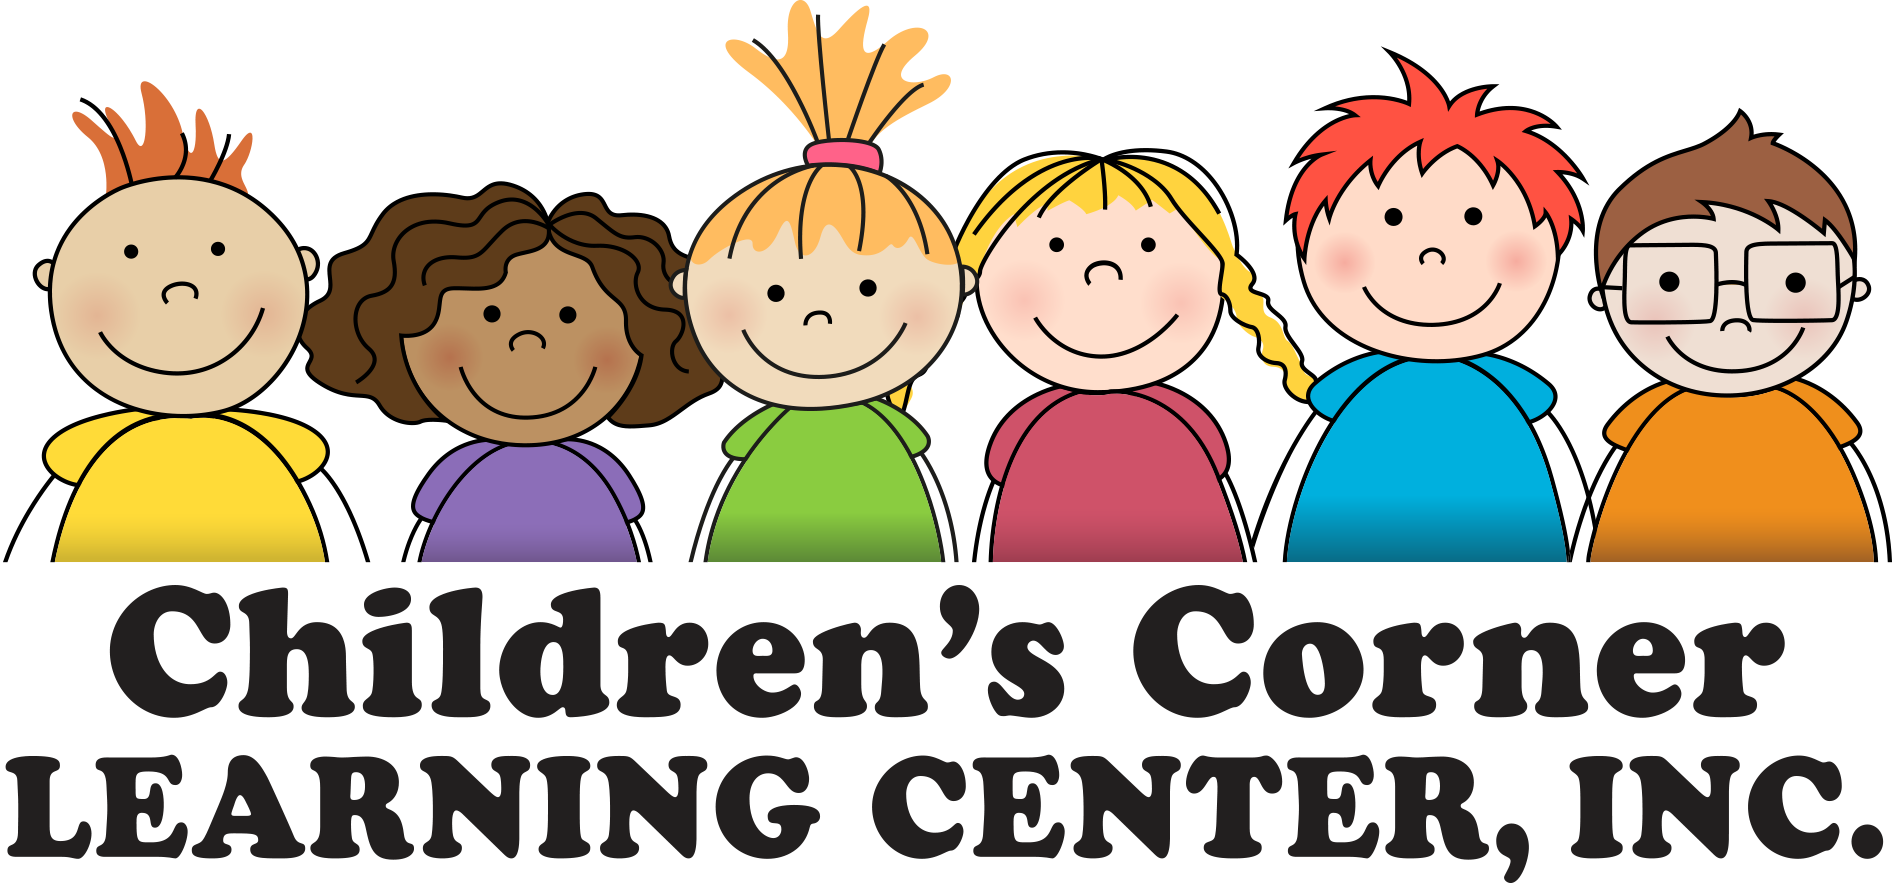 Daycare clipart first day preschool. Childrens corner learning center